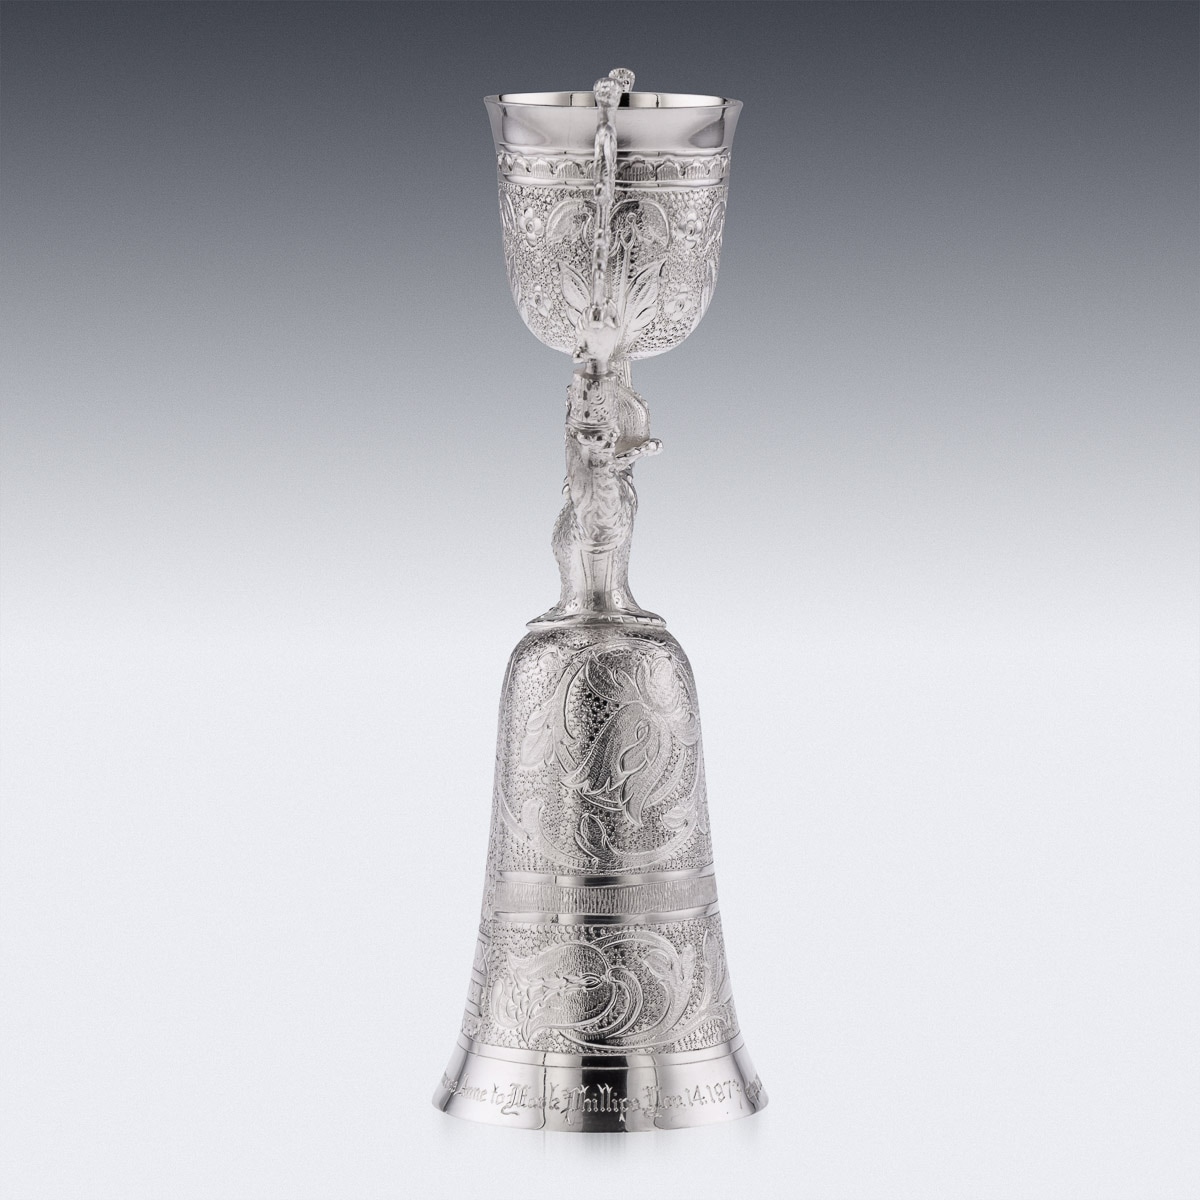 A ROYAL WEDDING SOLID STERLING SILVER NOVELTY WAGER CUP, LONDON, C. 1973 - Image 8 of 23